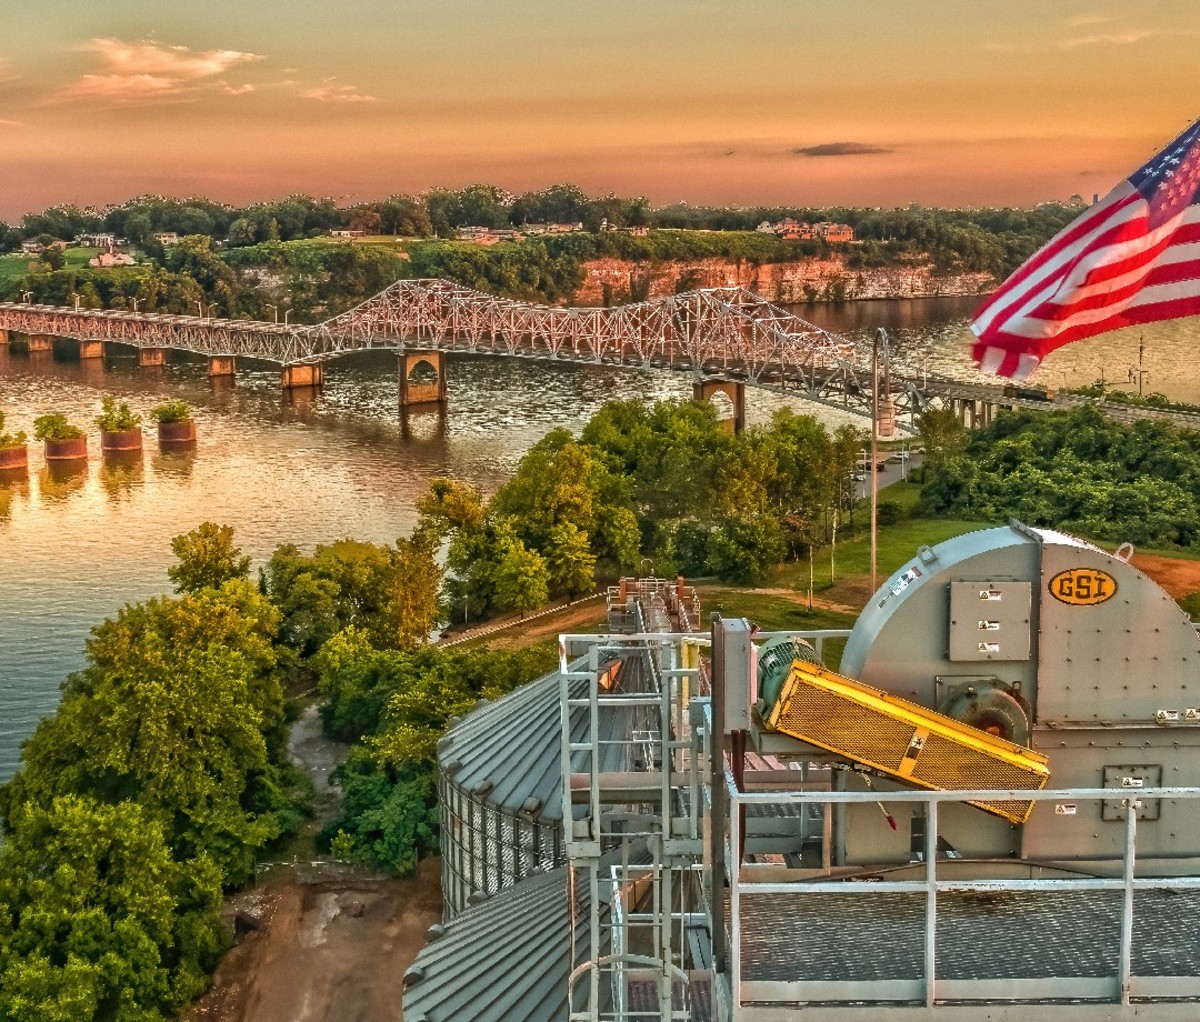 A view overlooking the Tennessee River toward the city of Muscle Shoals, Alabama.